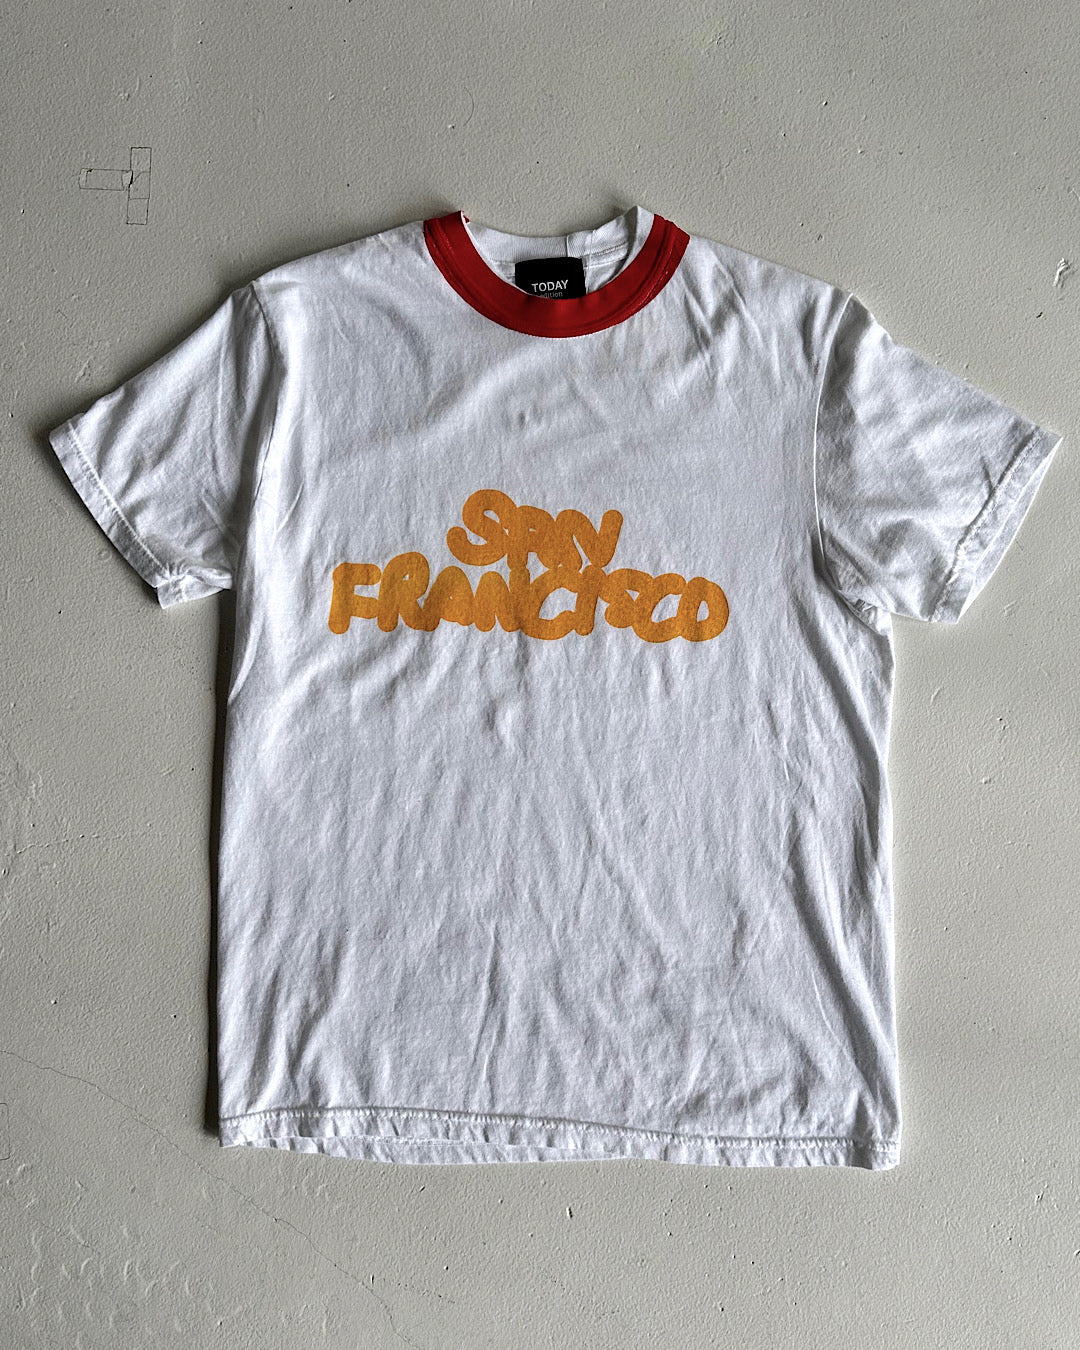 TODAY edition / Printed Ringer "SAN FRANCISCO" SS Tee - WHITE